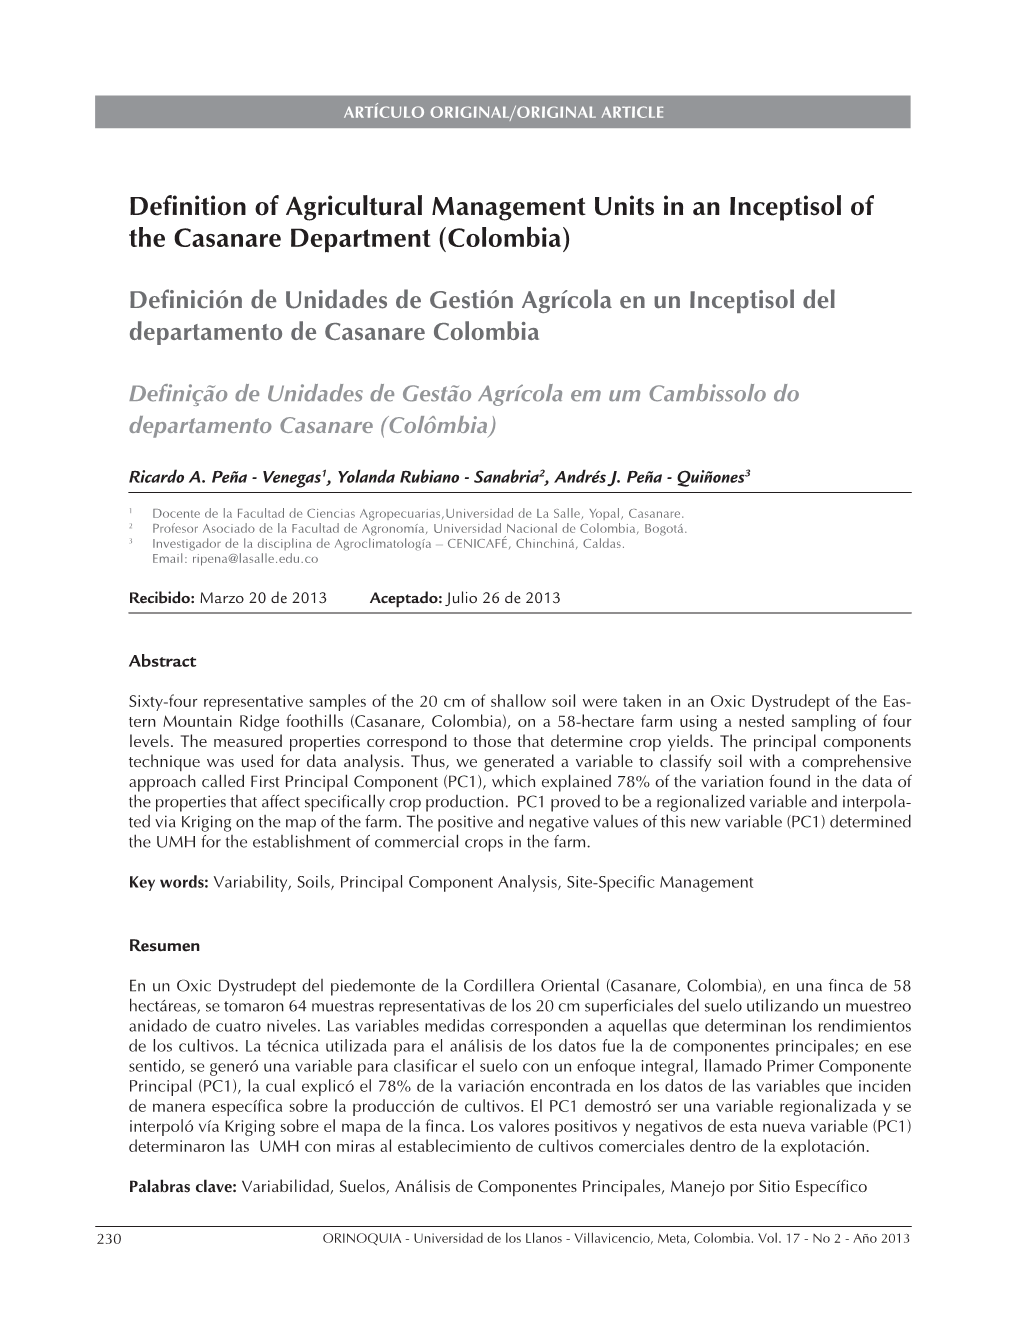 Definition of Agricultural Management Units in an Inceptisol of the Casanare Department (Colombia)